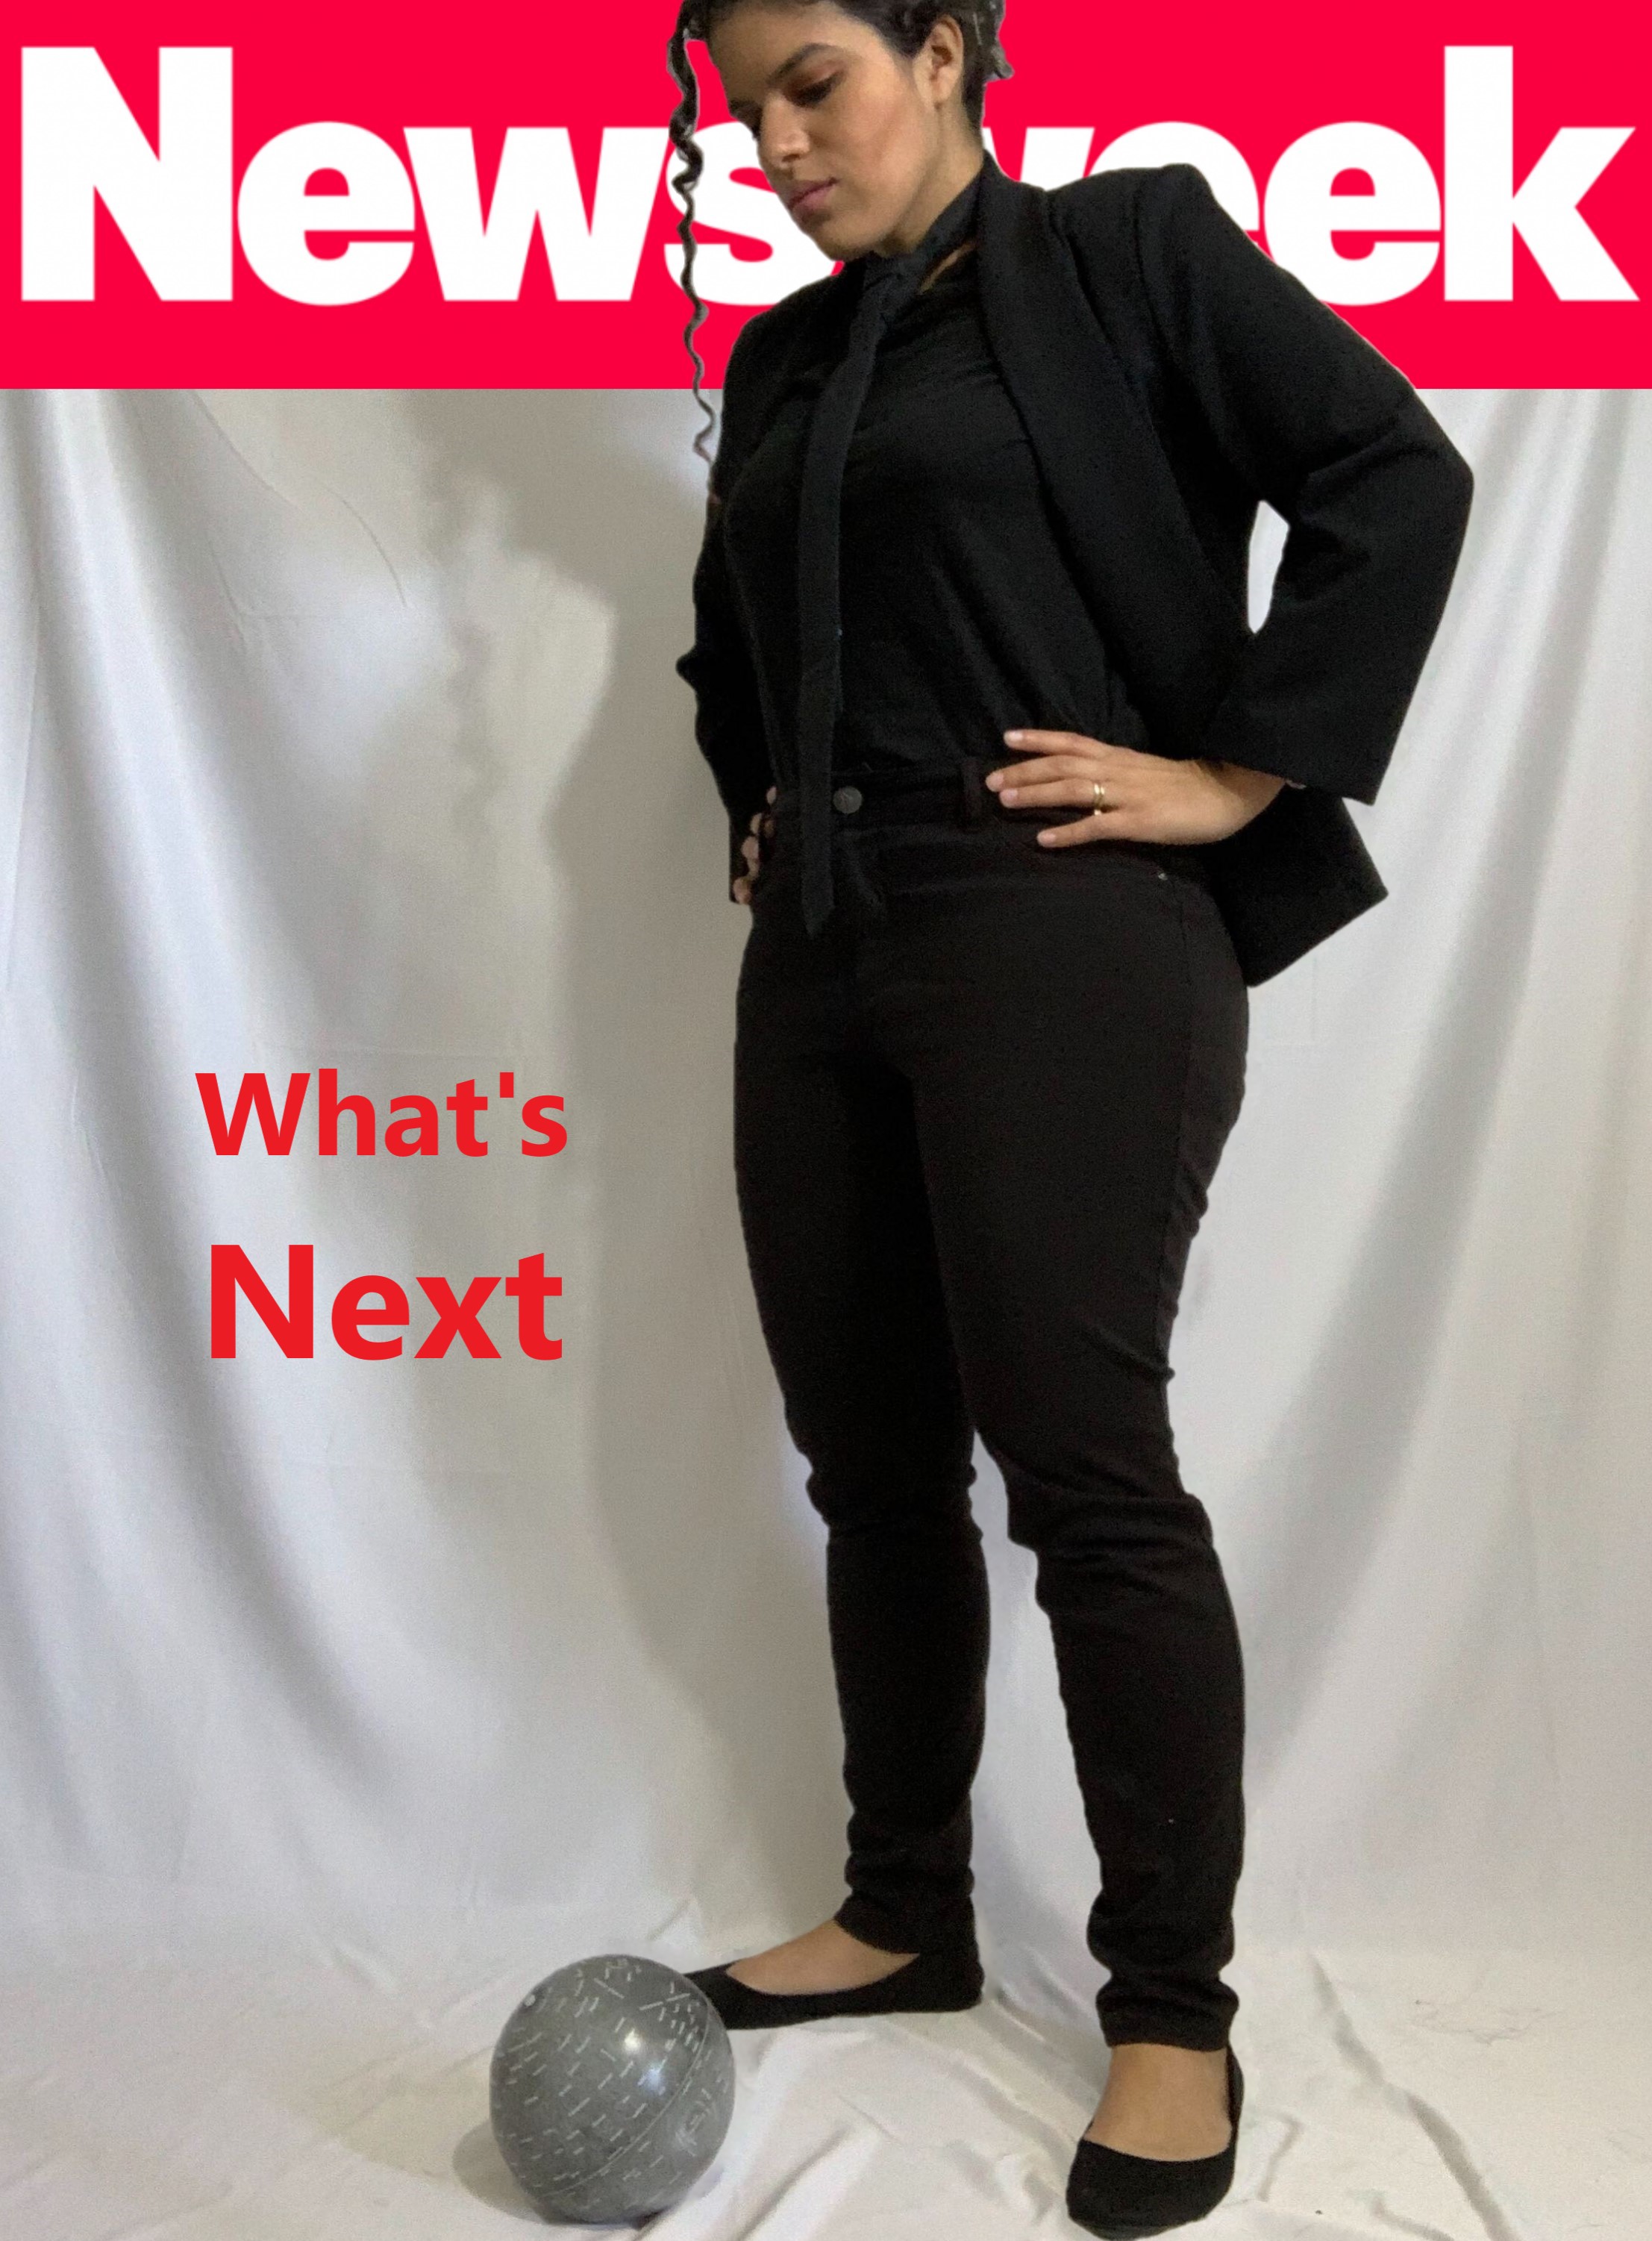 Sofia Olaya standing over a globe with the caption 'what's next' on a parody Newsweek cover, similar to the cover shown in the Iron Man movies